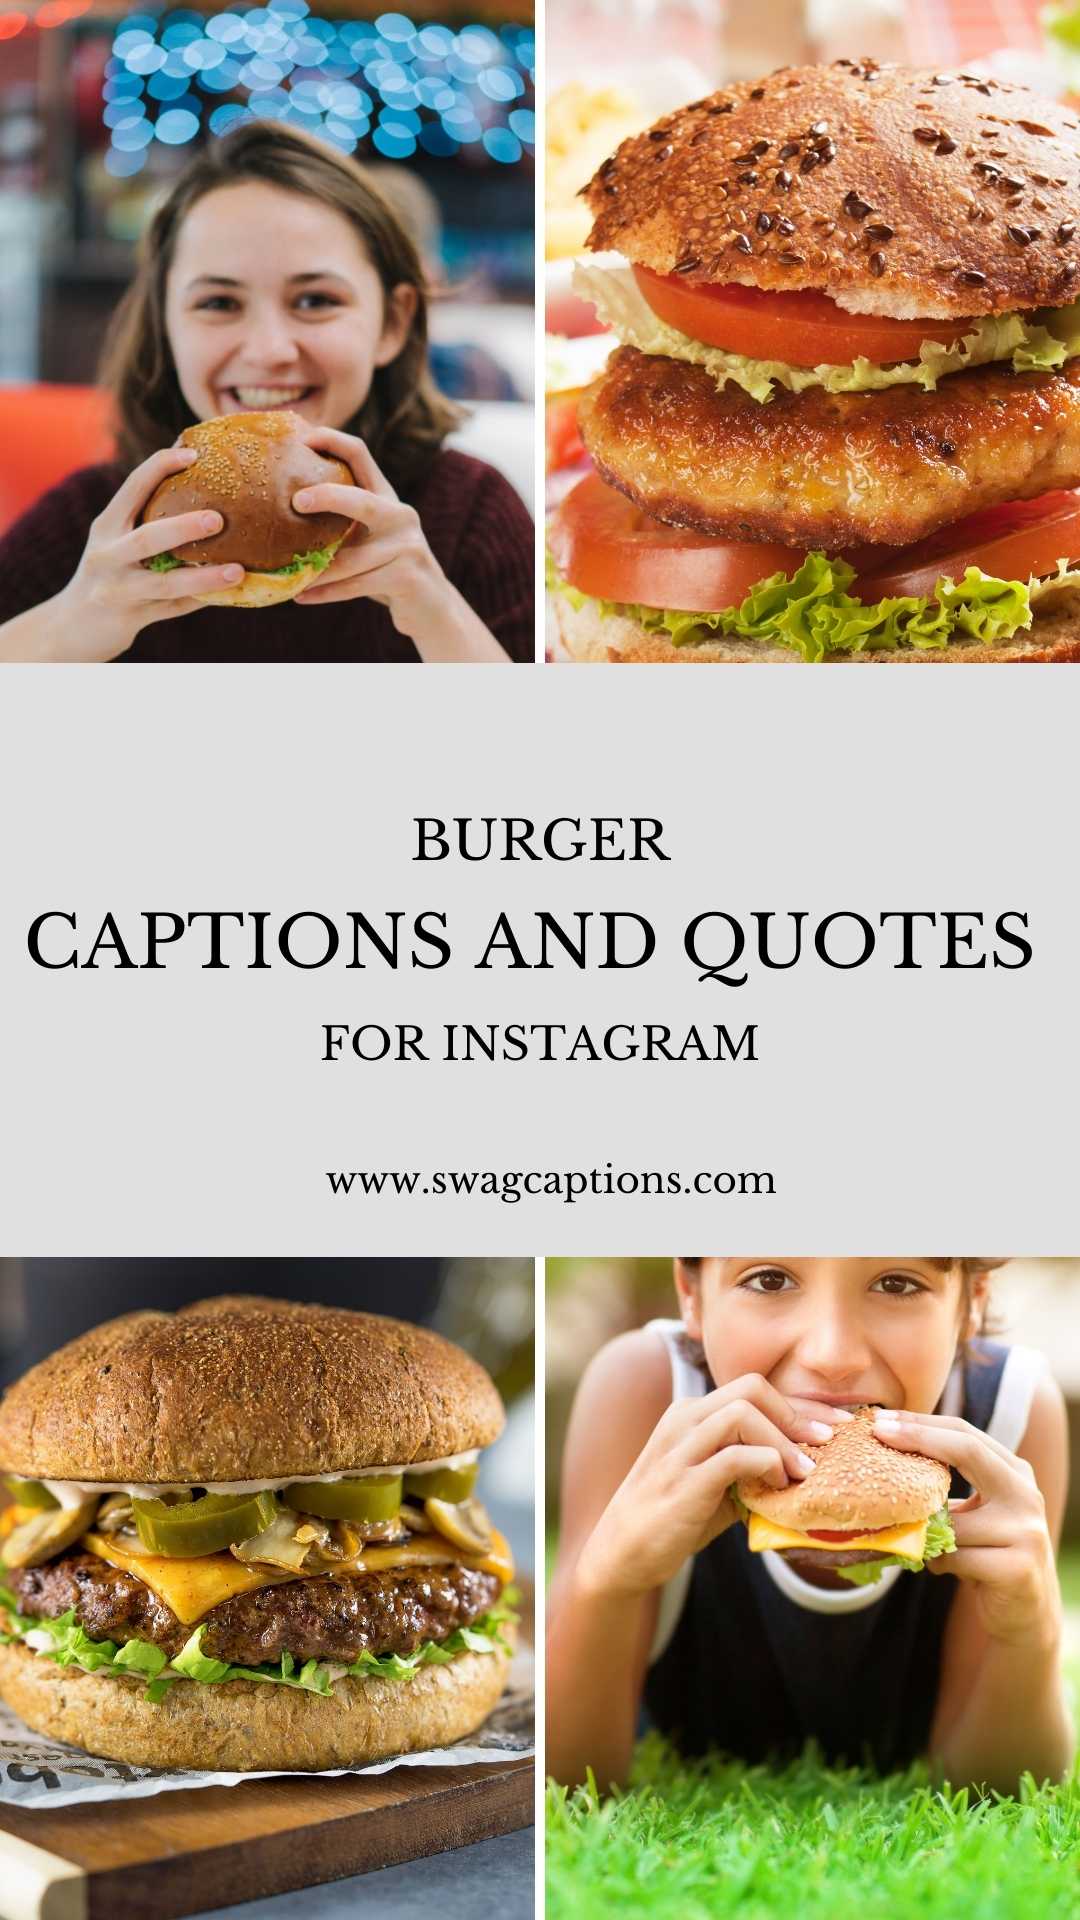 Burger Captions and Quotes for Instagram